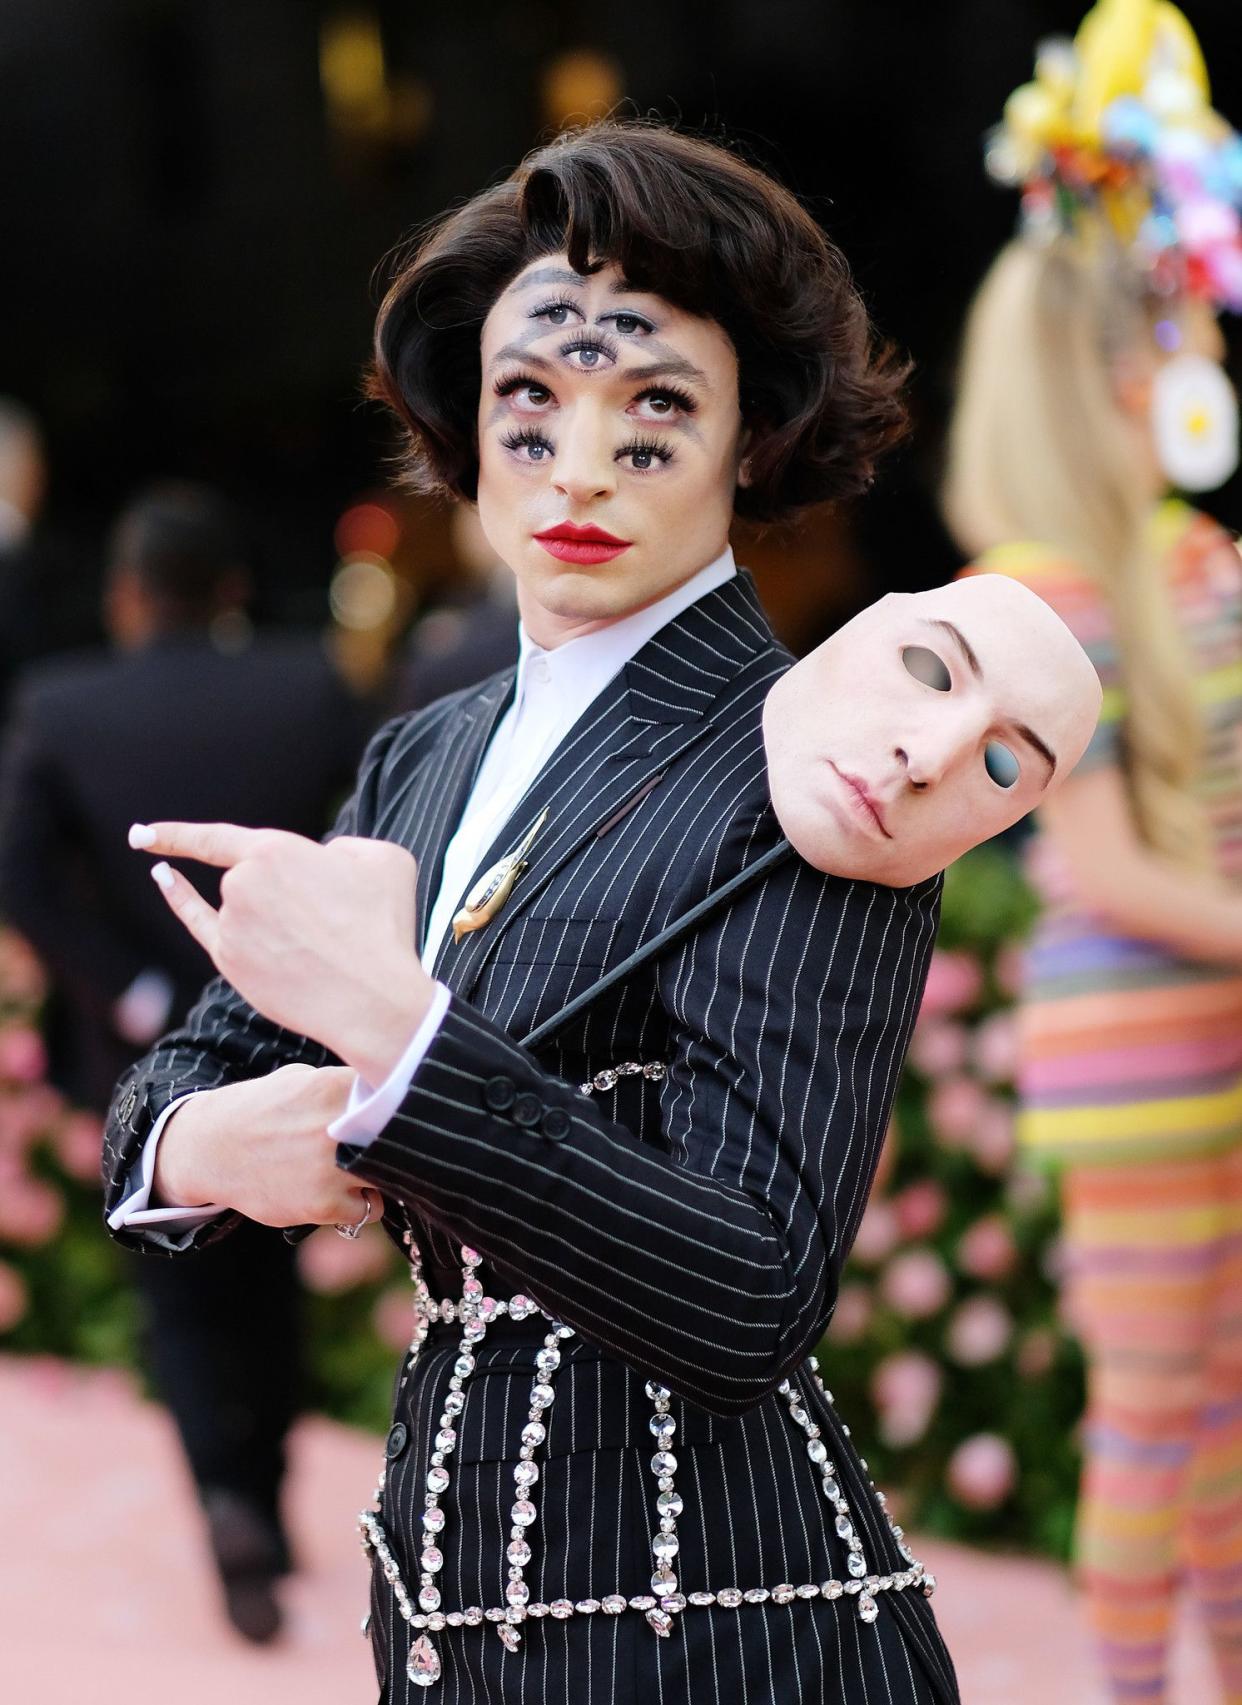 Ezra Miller attends The 2019 Met Gala Celebrating Camp: Notes on Fashion at Metropolitan Museum of Art on May 06, 2019 in New York City.